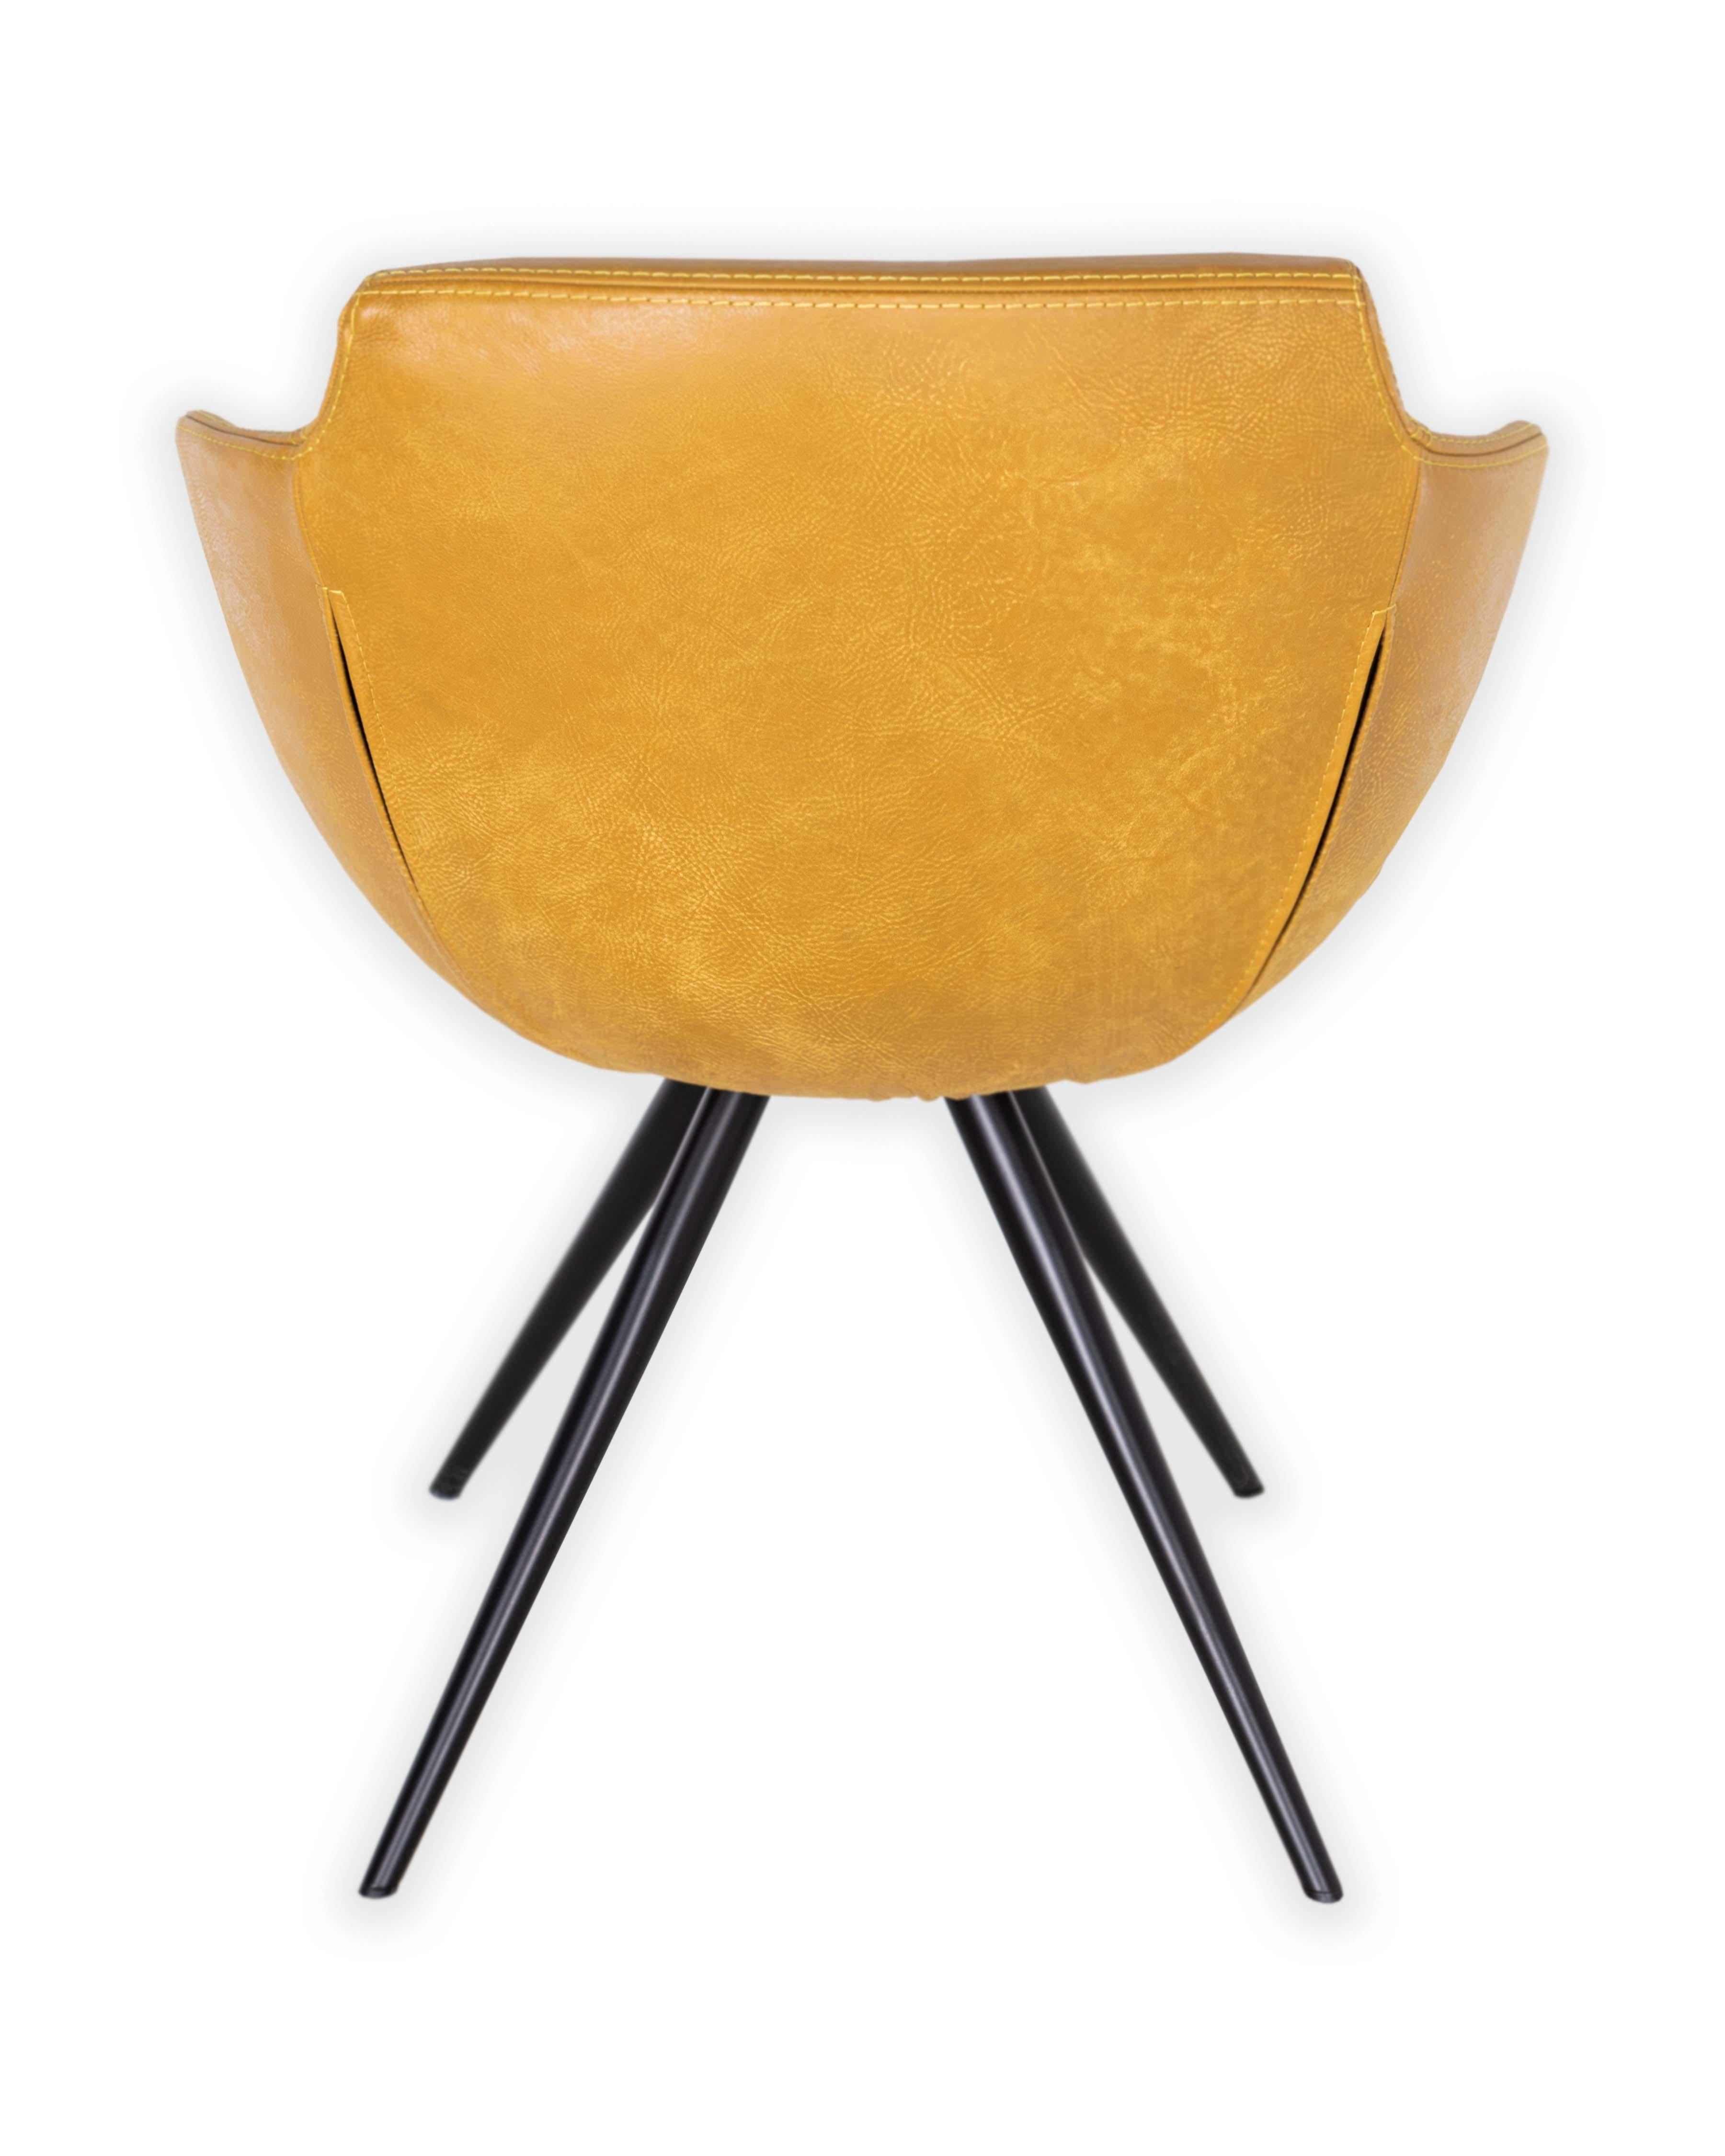 European Patinated Leather Club Dining Chair, Mustard